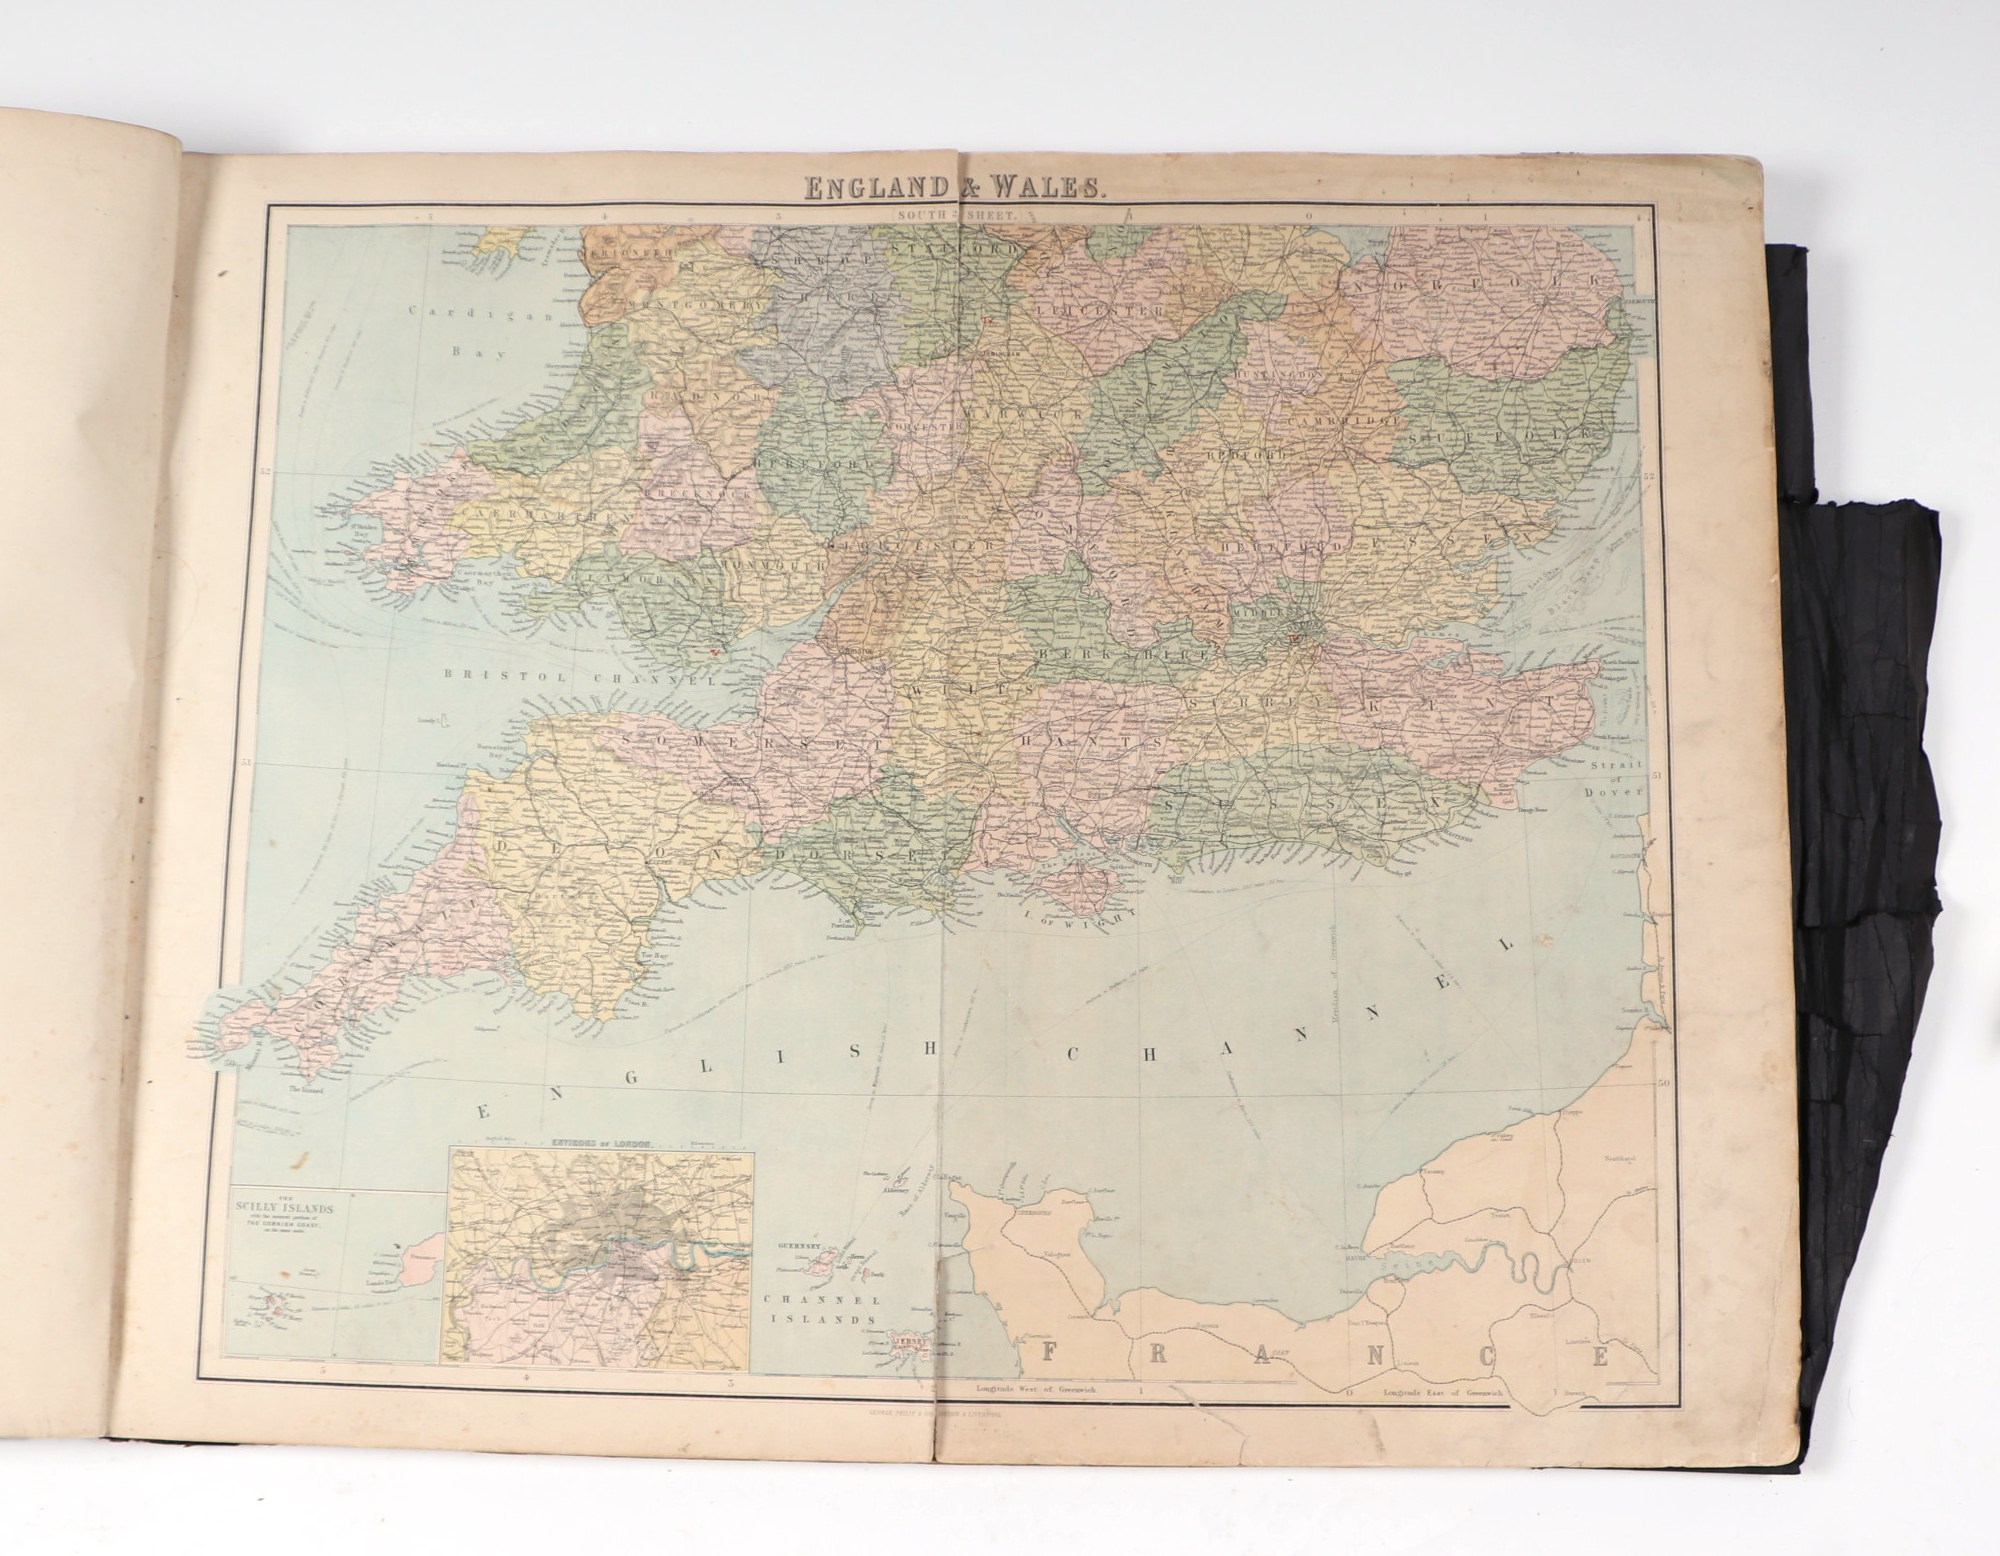 A late 19th century J. Bartholomew World Atlas published by George Philip & Son, London & Liverpool, - Image 2 of 5